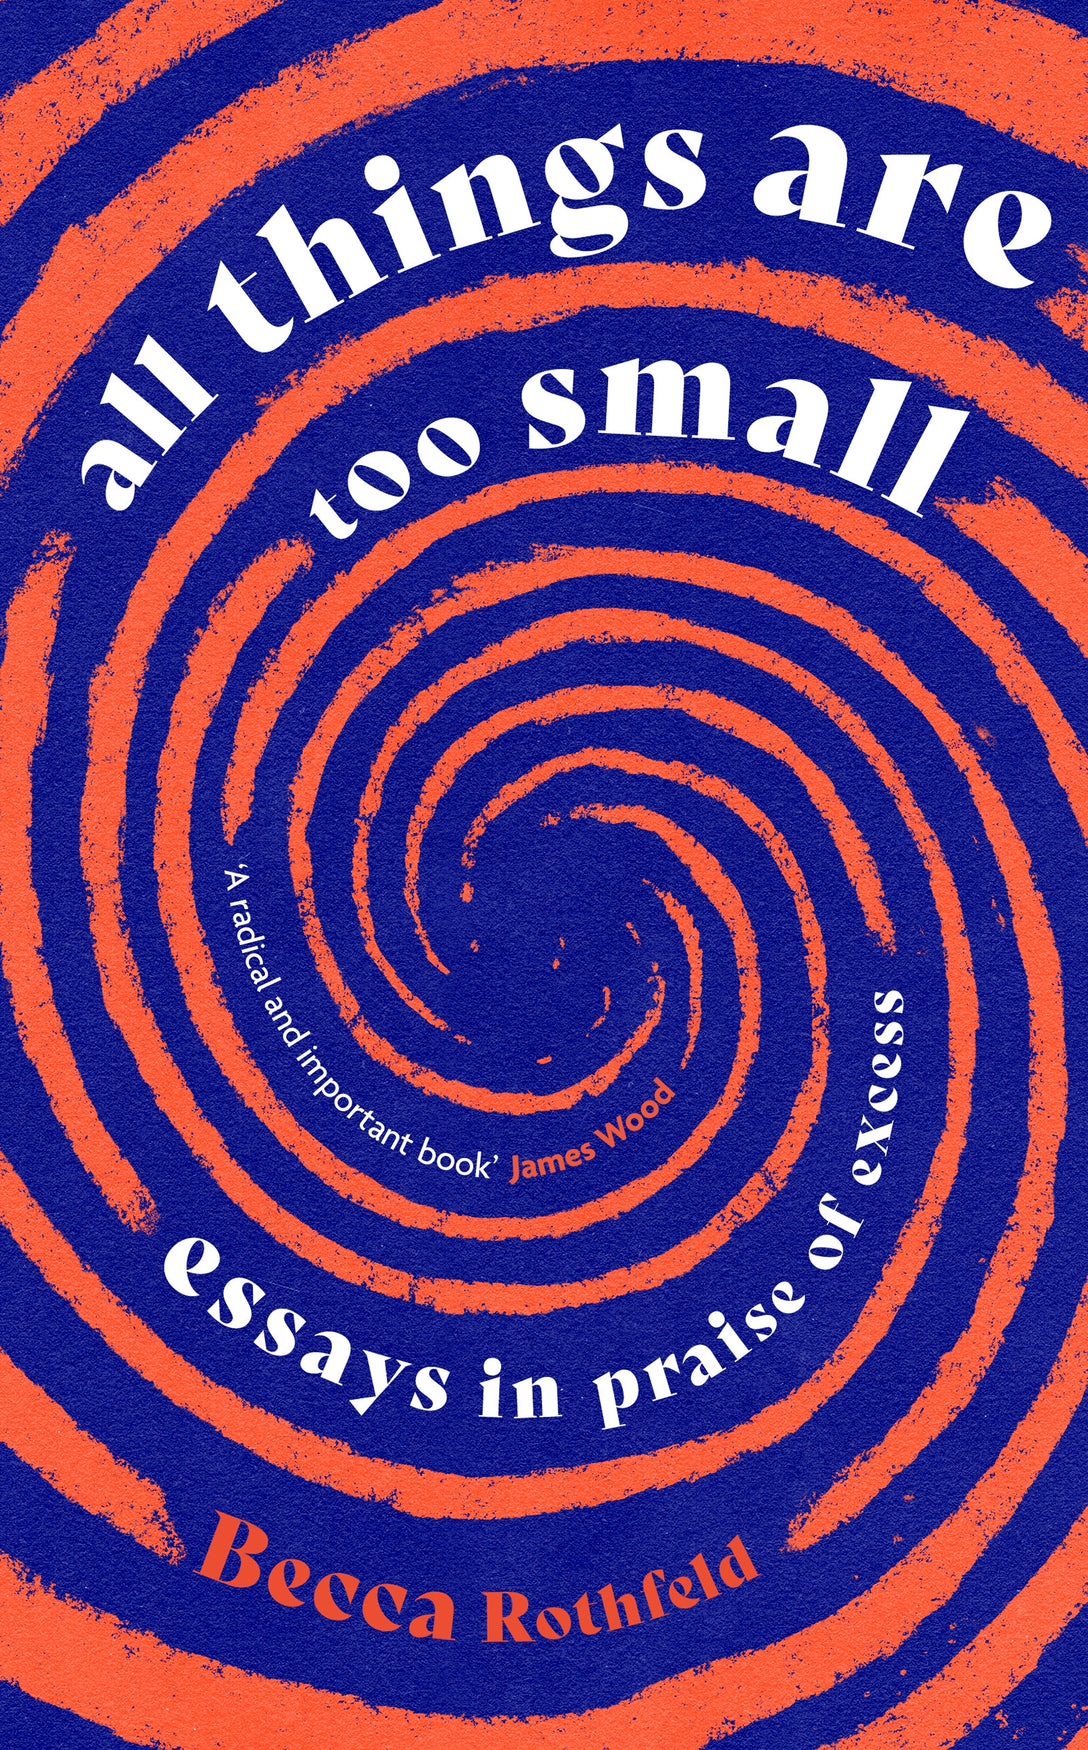 All Things Are Too Small by Becca Rothfeld